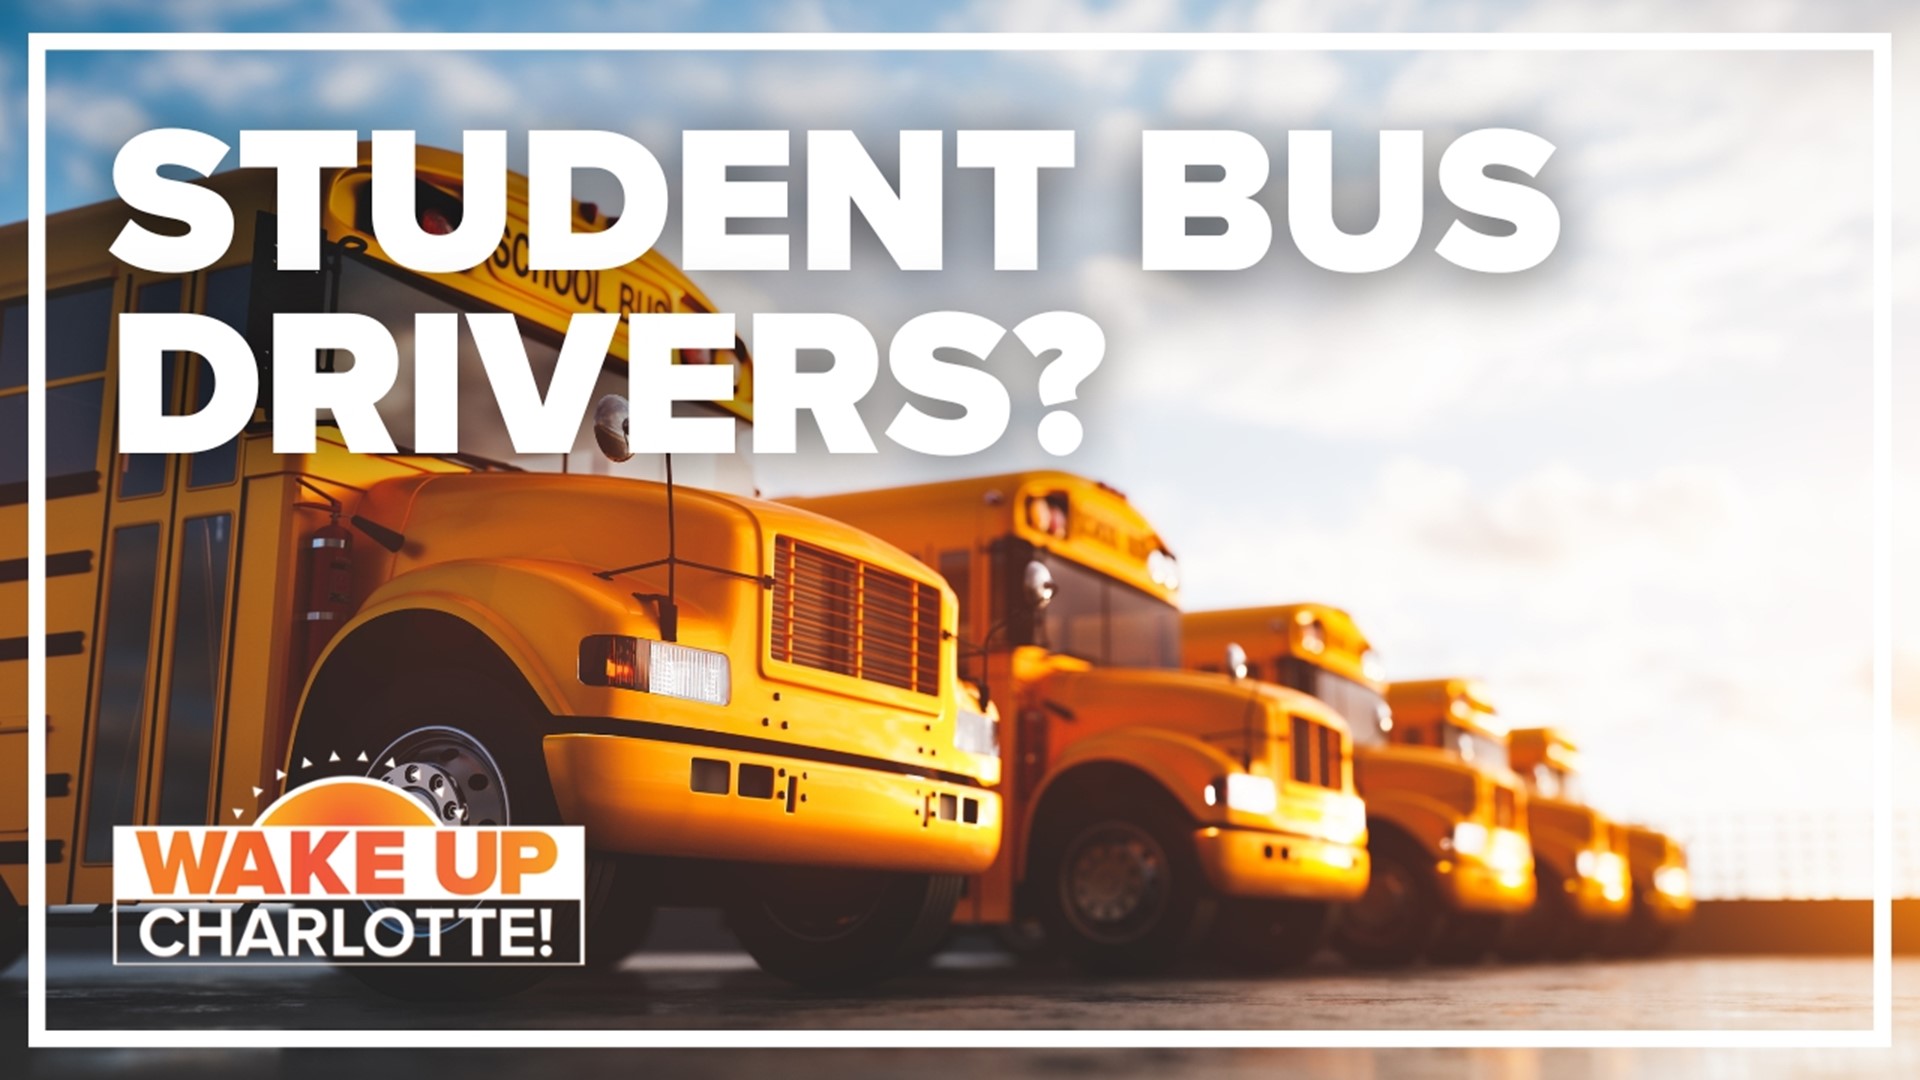 The North Carolina Department of Transportation said student bus drivers used to be a thing but aren't anymore.